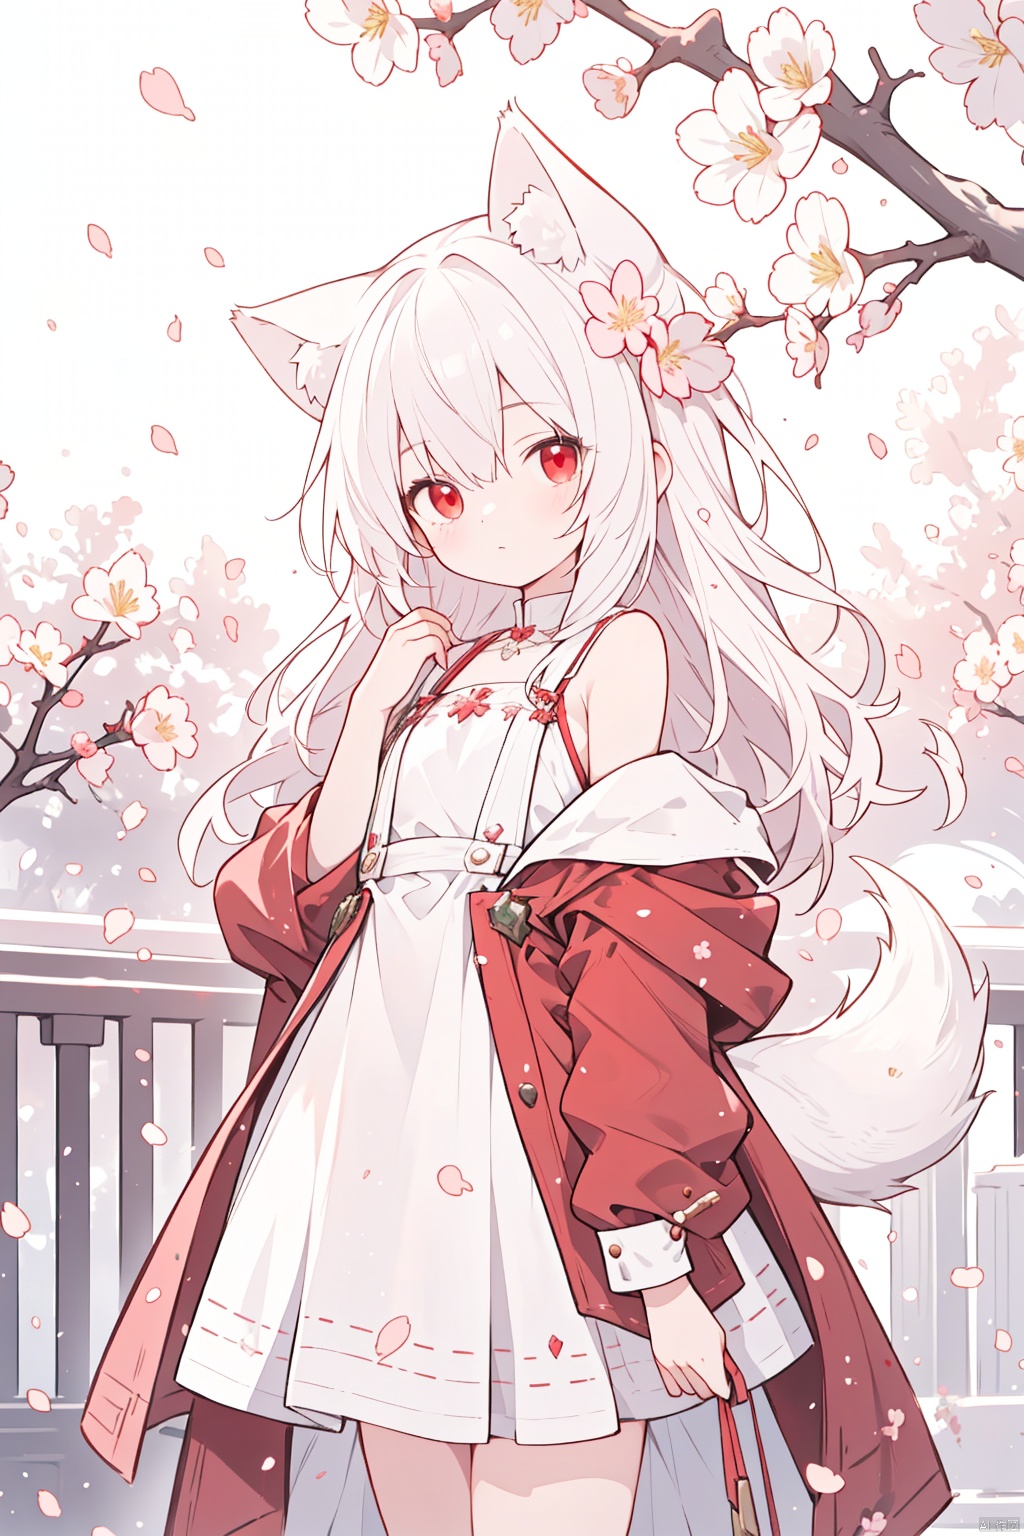  The image features a beautiful anime girl dressed in a flowing white and red dress, standing amidst a flurry of red cherry blossoms. The contrast between her white dress and the red flowers creates a striking visual effect. The lighting in the image is well-balanced, casting a warm glow on the girl and the surrounding flowers. The colors are vibrant and vivid, with the red cherry blossoms standing out against the white sky. The overall style of the image is dreamy and romantic, perfect for a piece of anime artwork. The quality of the image is excellent, with clear details and sharp focus. The girl's dress and the flowers are well-defined, and the background is evenly lit, without any harsh shadows or glare. From a technical standpoint, the image is well-composed, with the girl standing in the center of the frame, surrounded by the blossoms. The use of negative space in the background helps to draw the viewer's attention to the girl and the flowers. The cherry blossoms, often associated with transience and beauty, further reinforce this theme. The girl, lost in her thoughts, seems to be contemplating the fleeting nature of beauty and the passage of time. Overall, this is an impressive image that showcases the photographer's skill in capturing the essence of a scene, as well as their ability to create a compelling narrative through their art. wolf girl,loli,wolf girl,white long hair,red eyes,,white dress,bare shoulders,( large tail), flat chest, colors